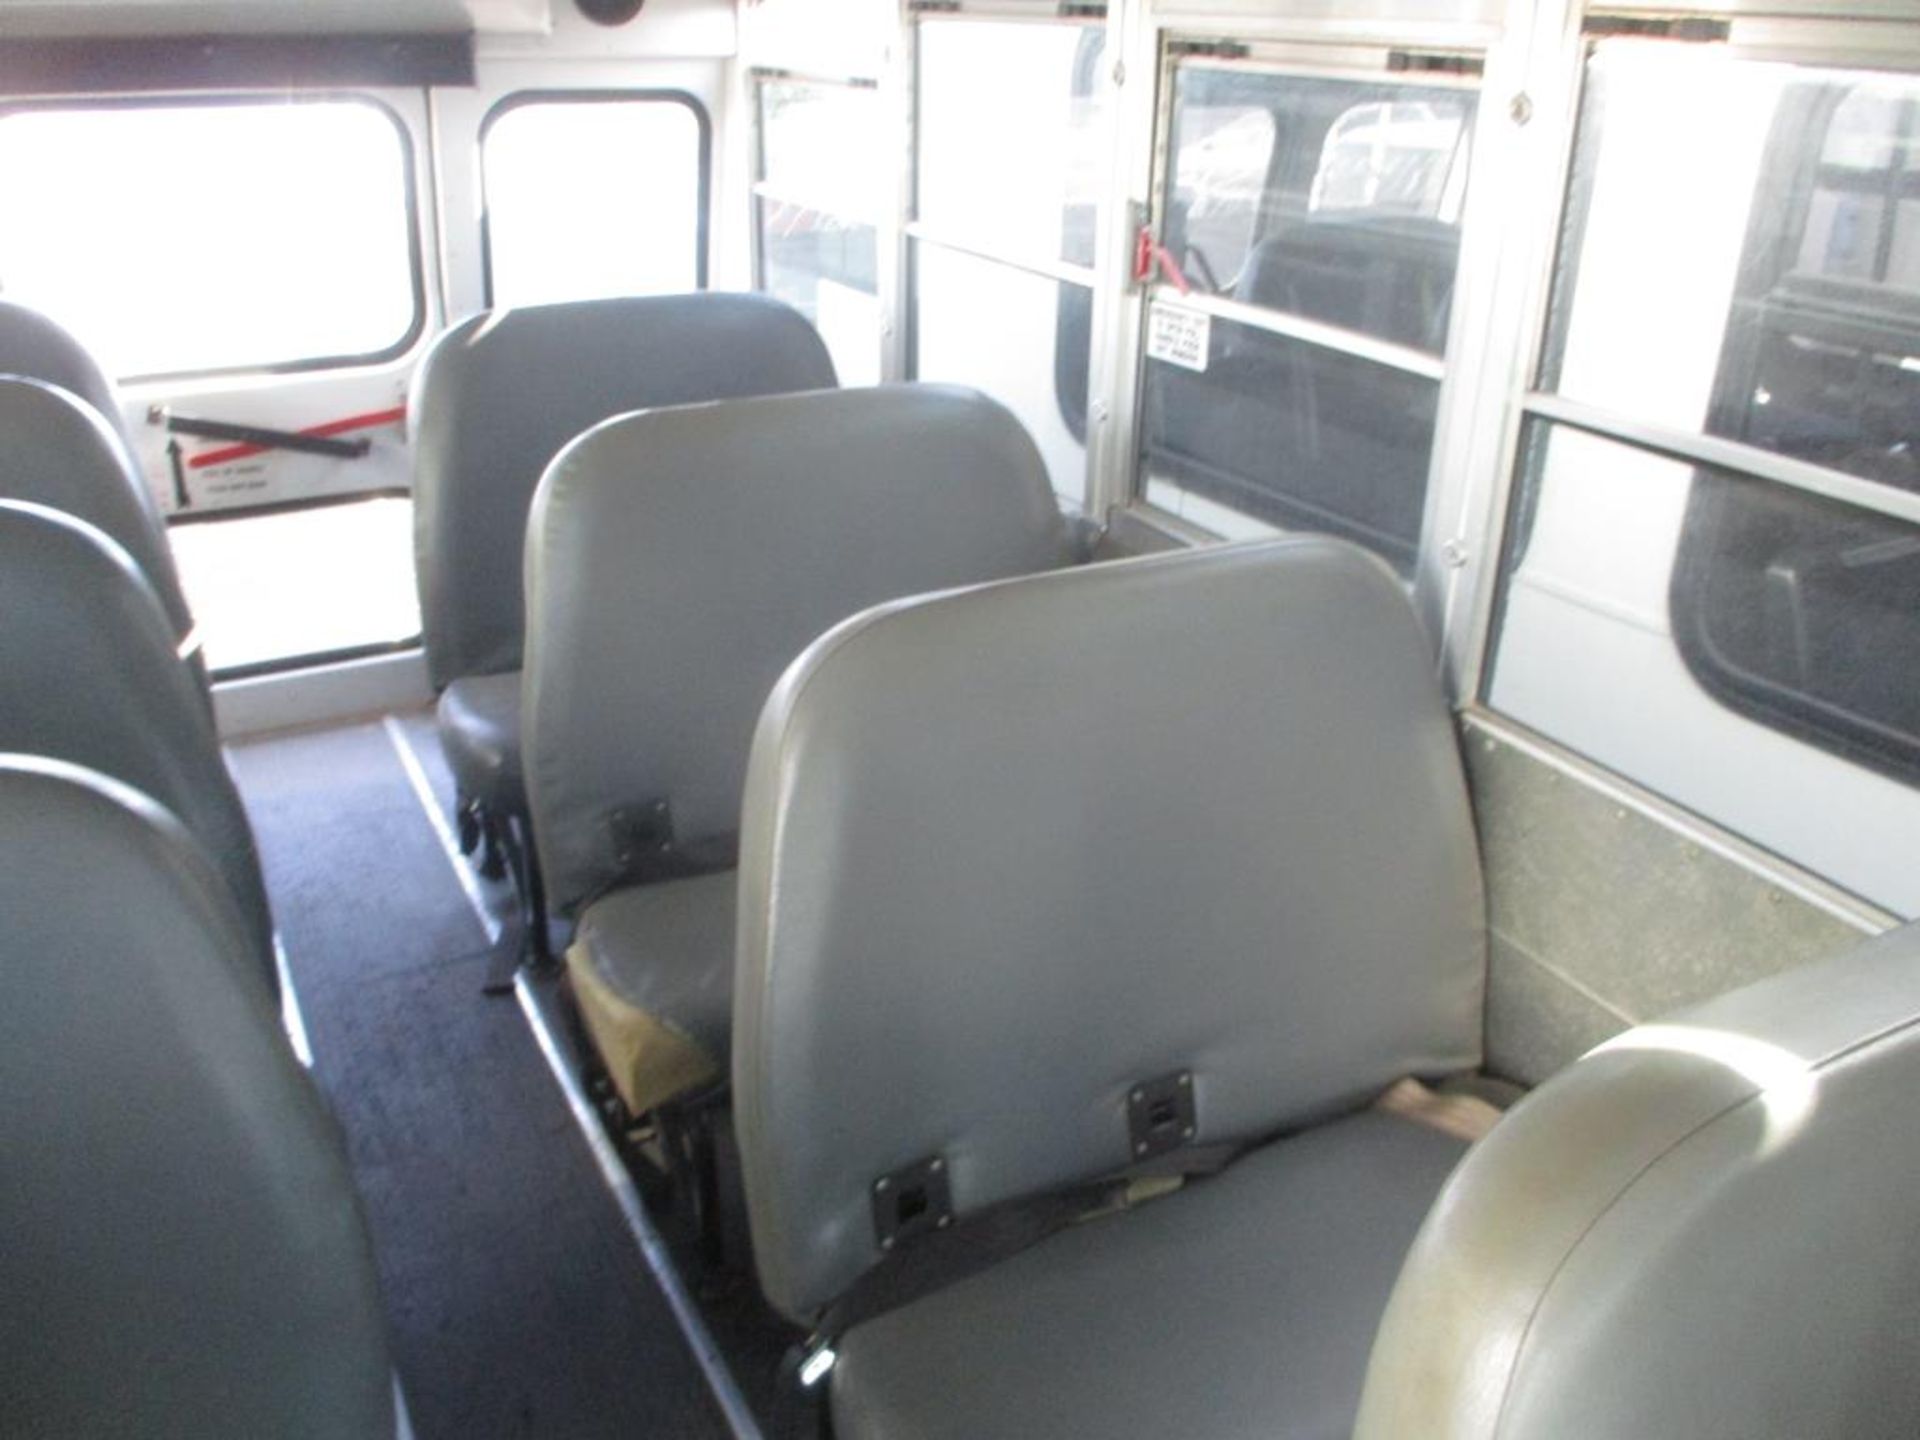 (Lot # 3920) - 2008 Ford E-Series School Bus - Image 8 of 13